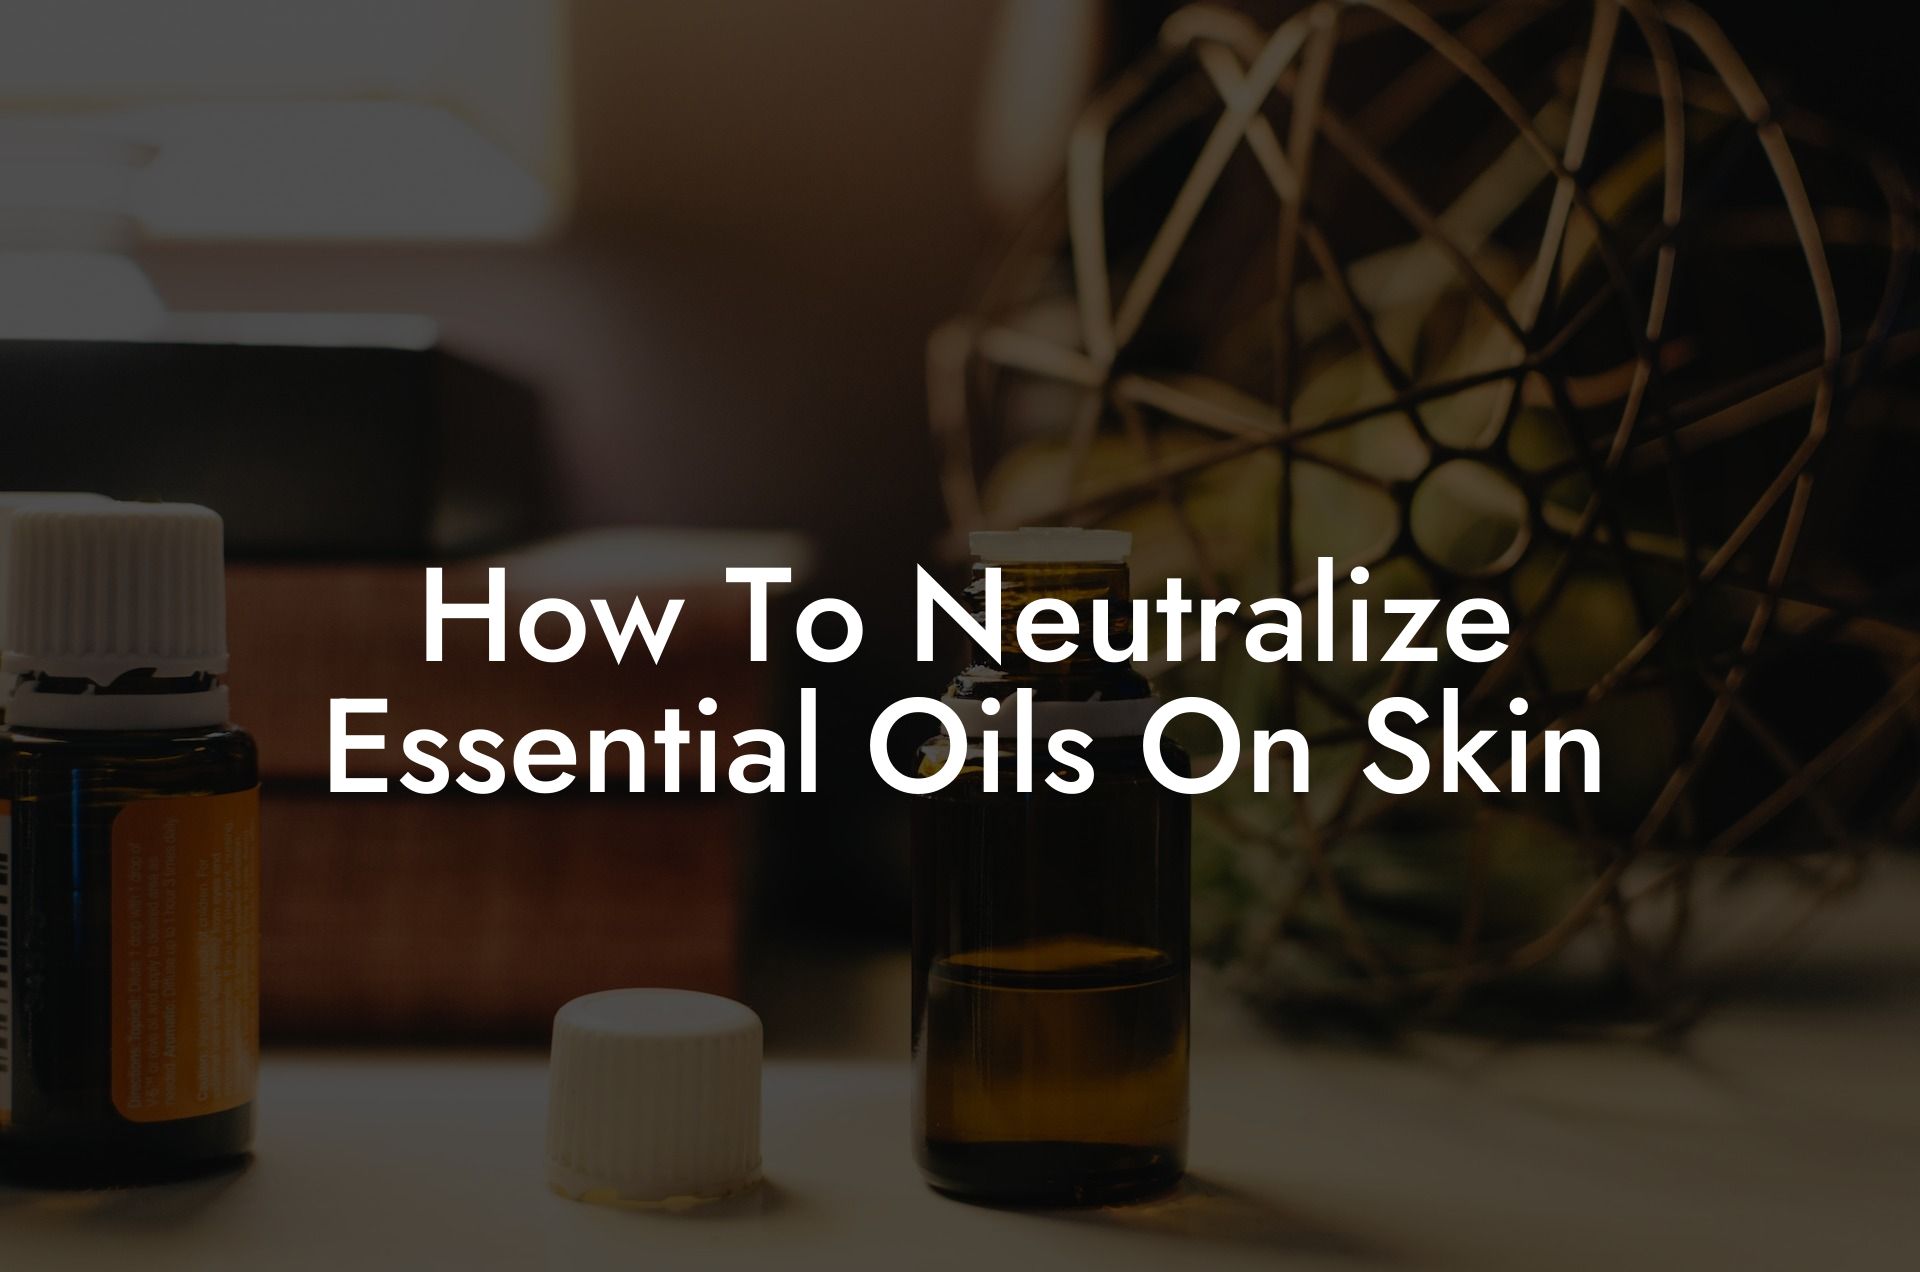 How To Neutralize Essential Oils On Skin